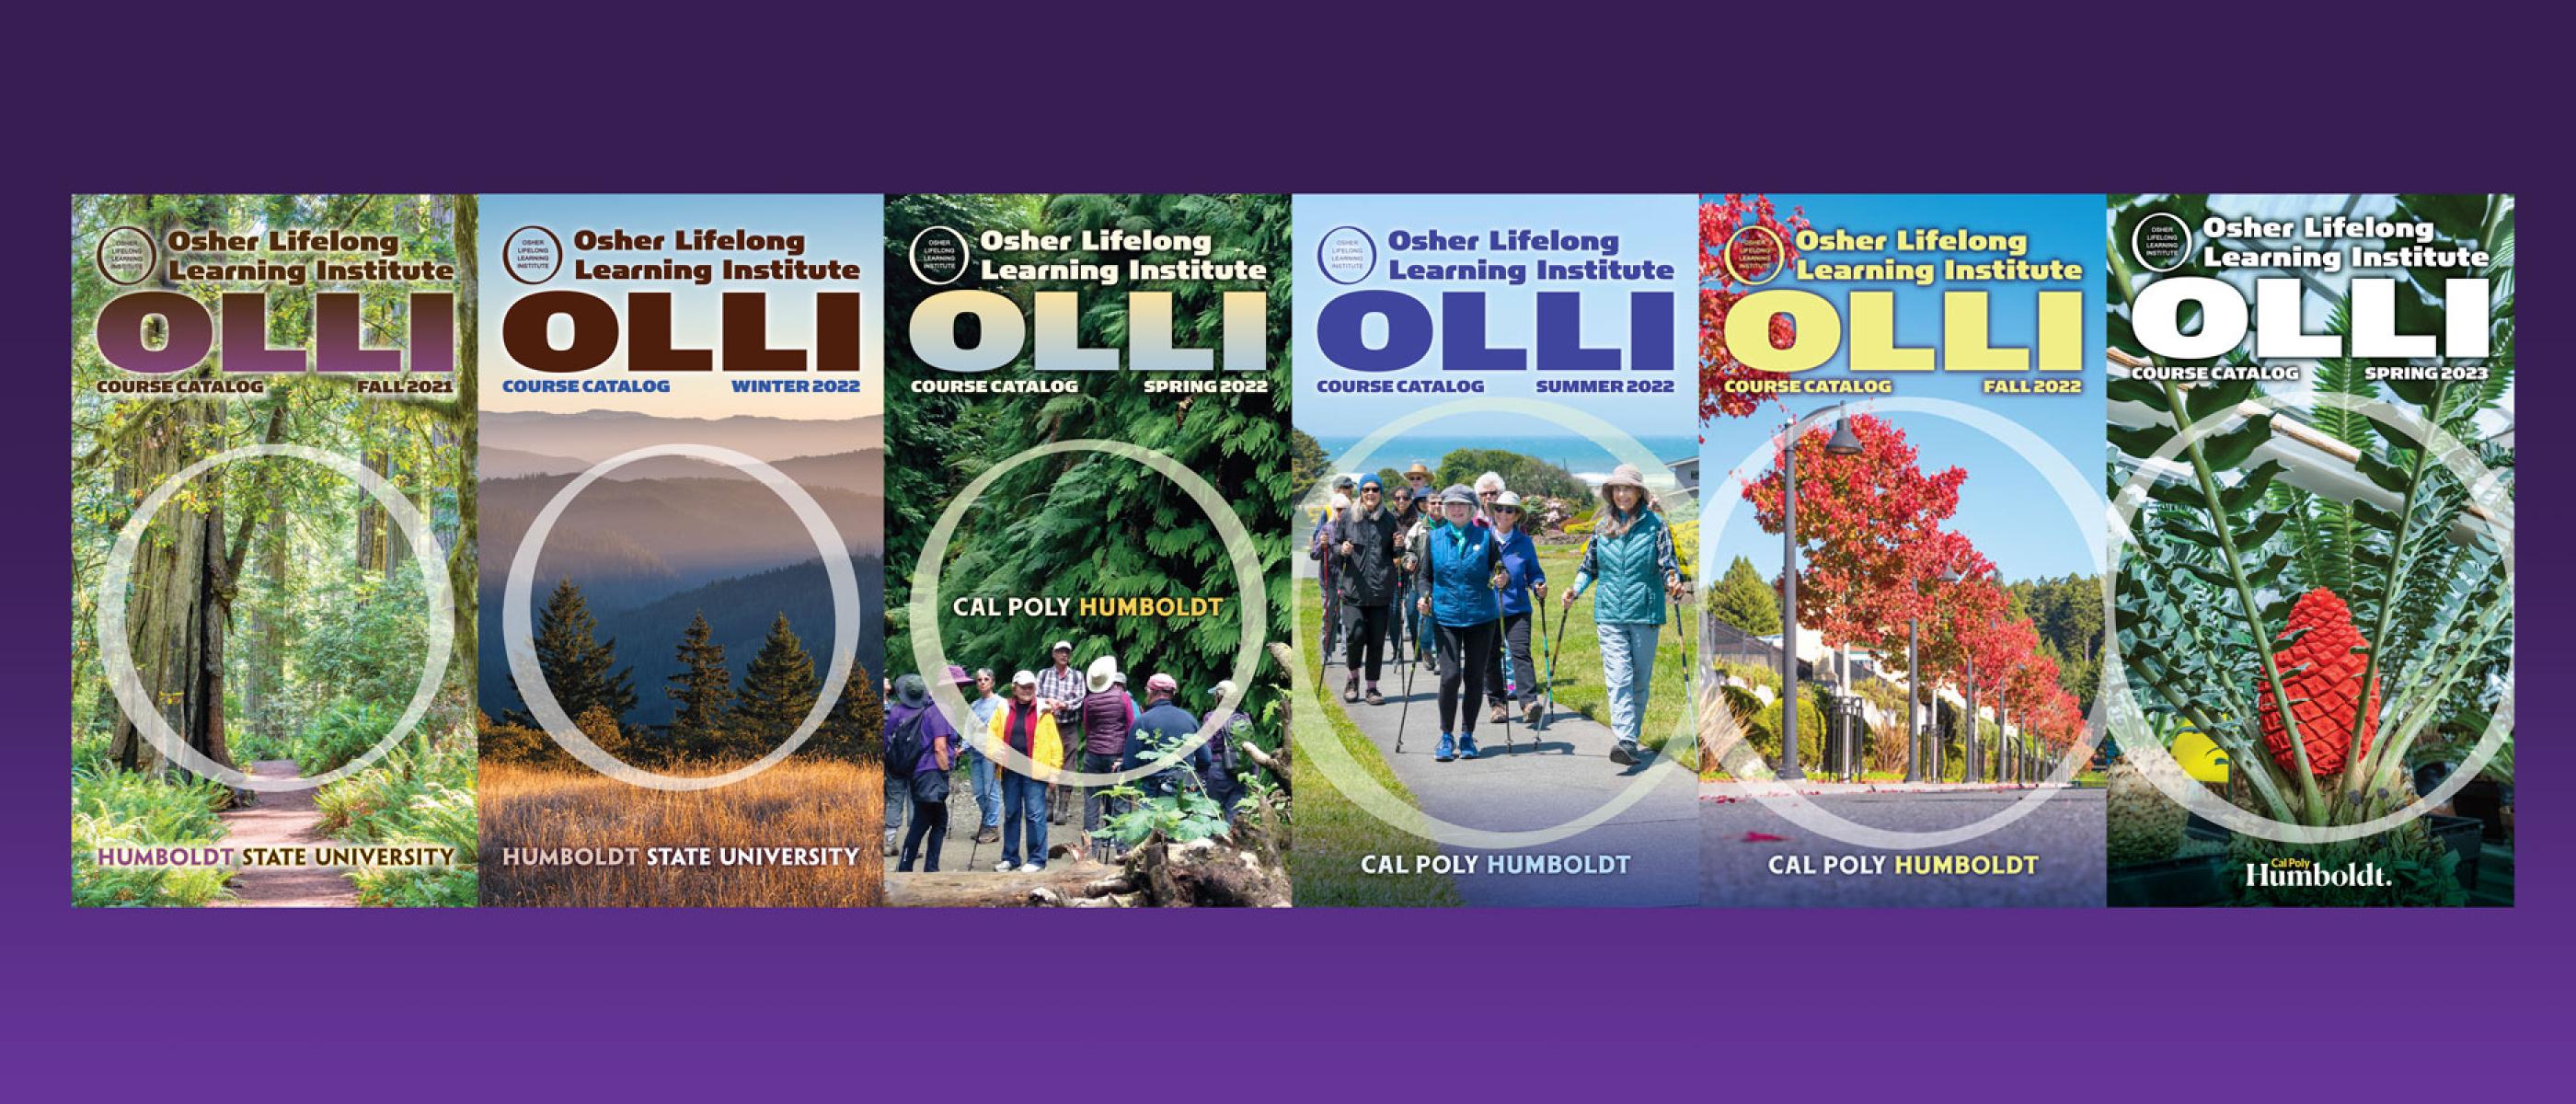 OLLI catalog covers from the last 2 years